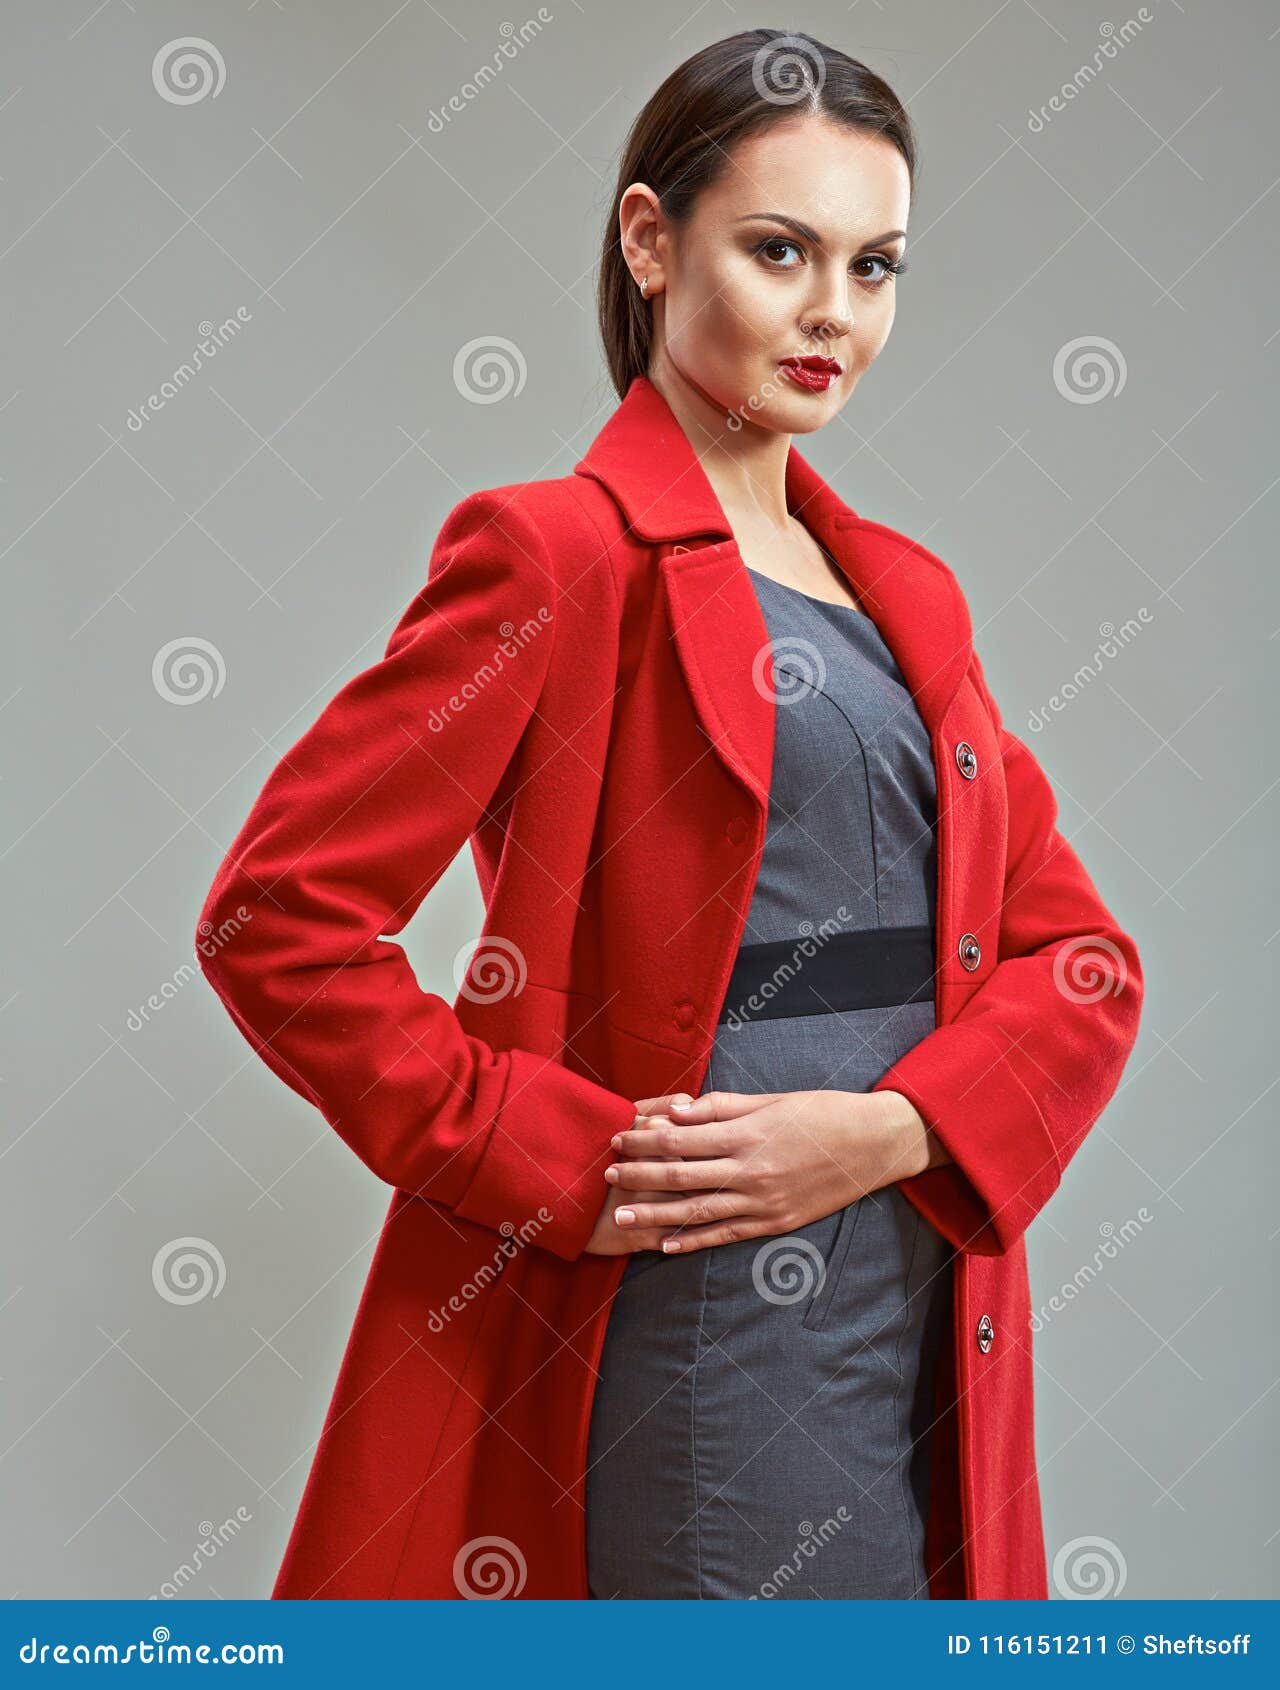 Business Woman Chief Studio Portrait in Red Coat. Stock Image - Image ...